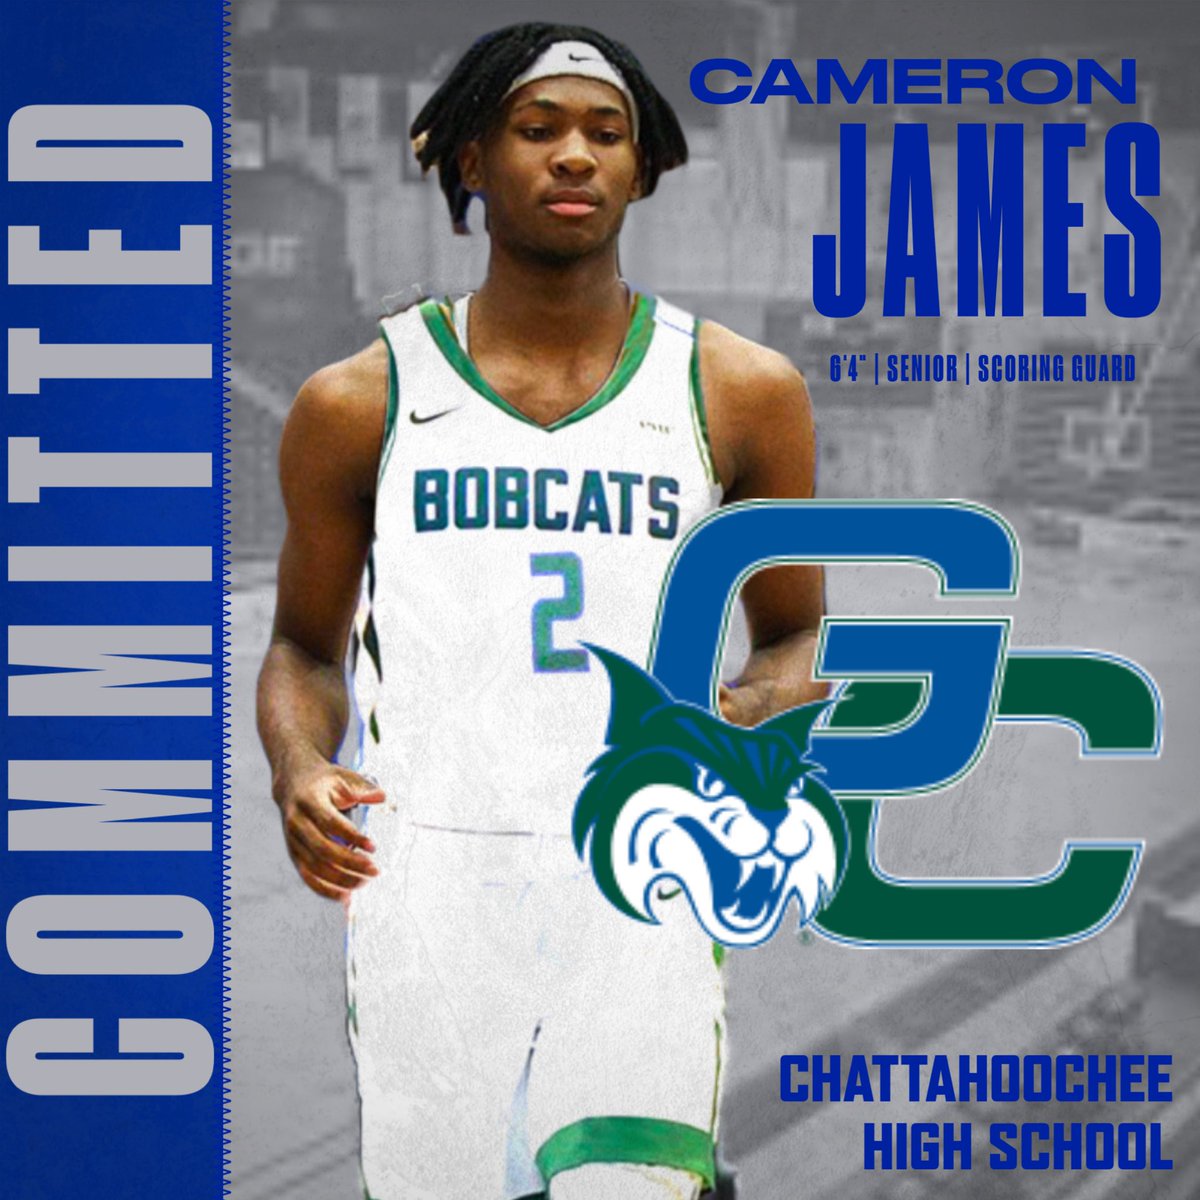 COMMITTED!! GOD’S TIMING!!!💙💚